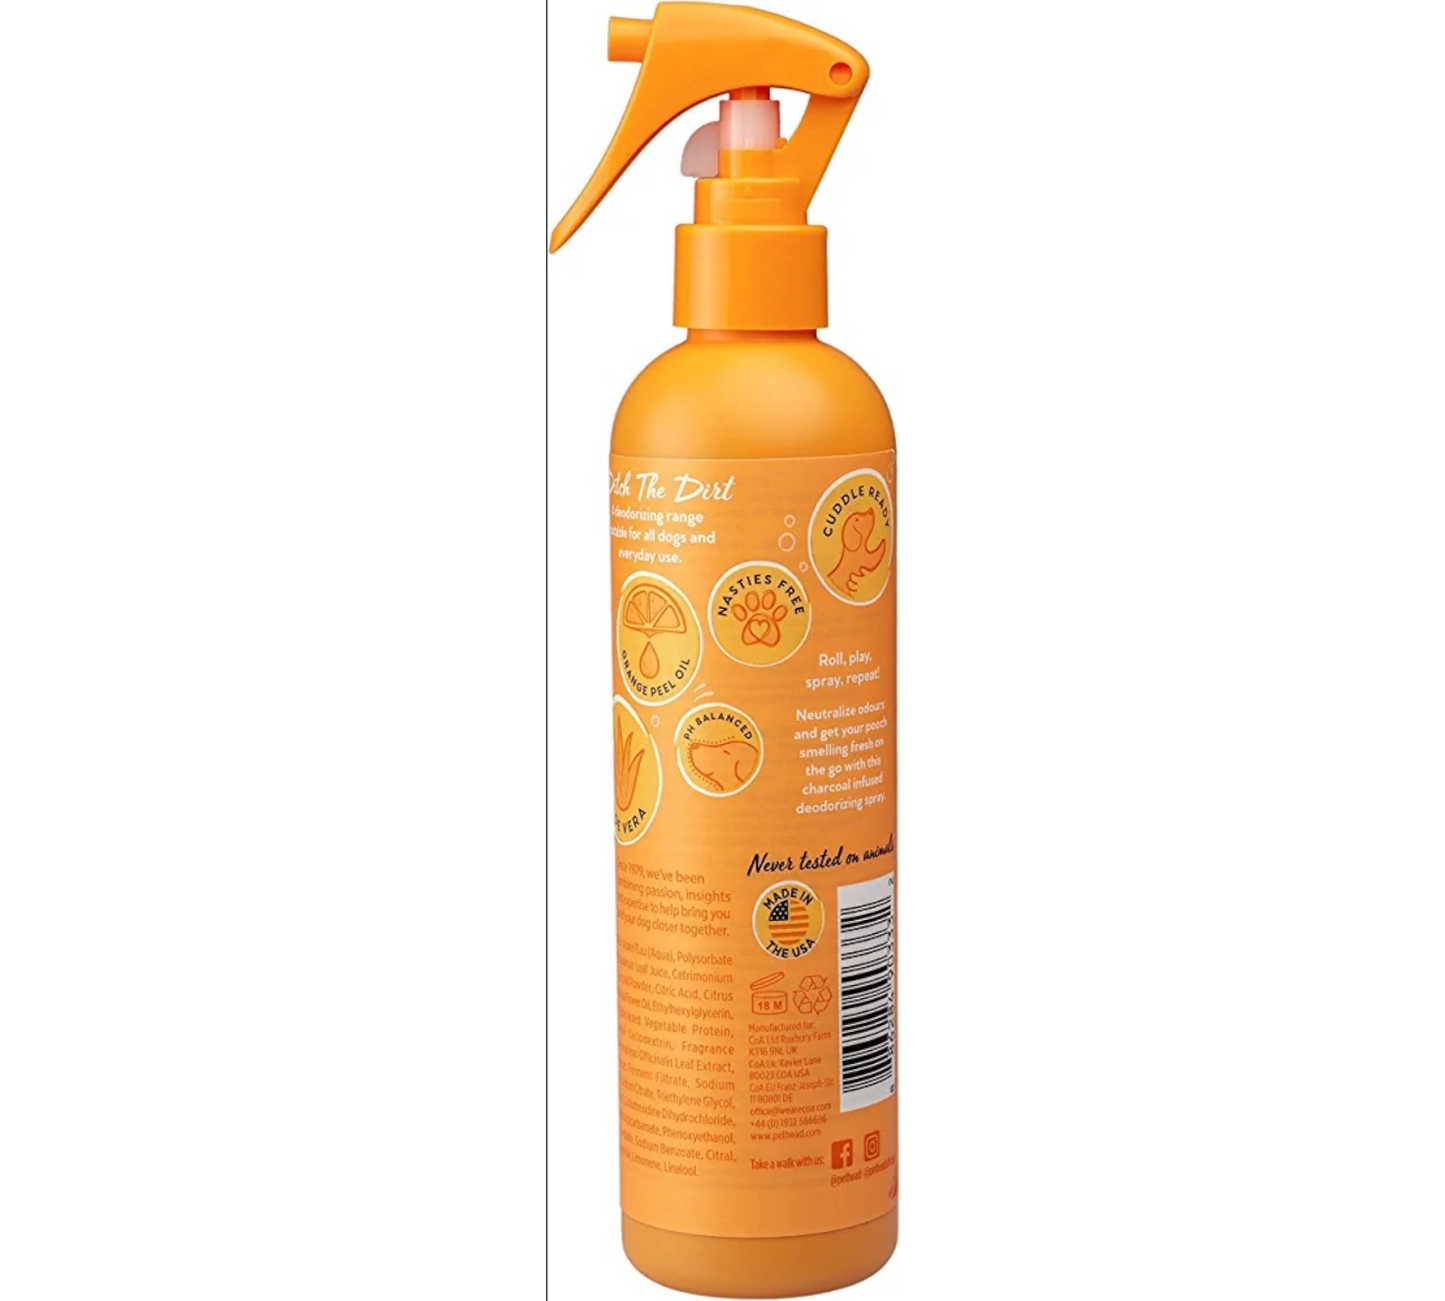 Canine's World Dog Cologne Pet Head Ditch the Dirt Deodorizing Spray for Dogs Orange with Aloe Vera Pet Head